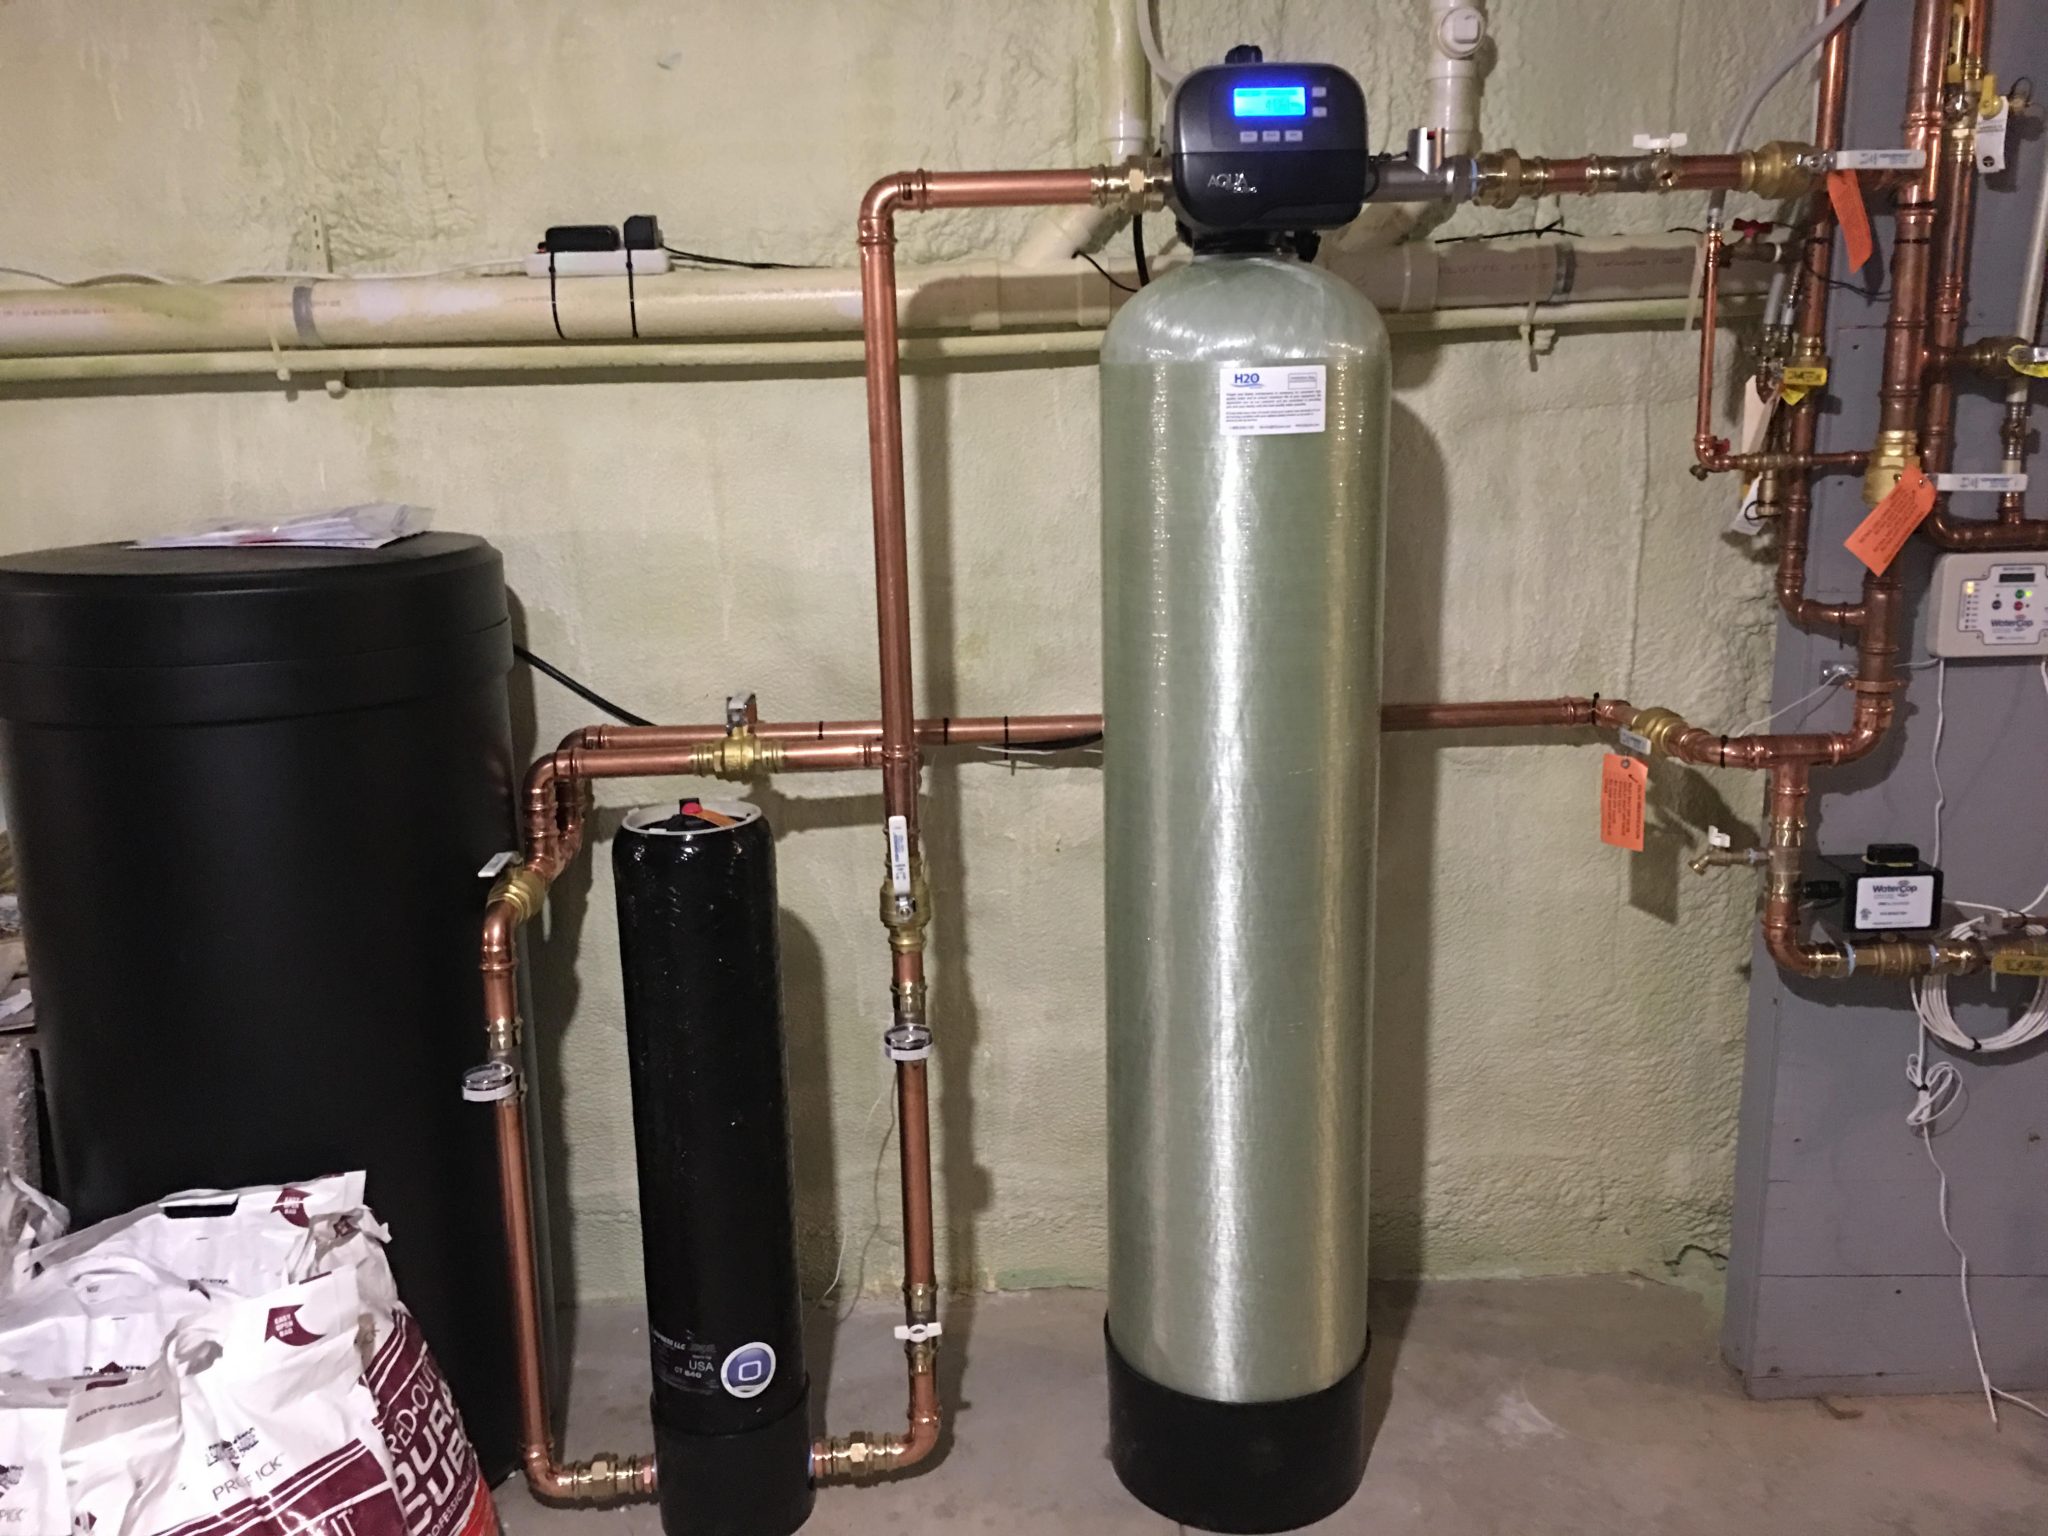 2 cubic feet high efficiency Water Softener with large capacity sediment filter.